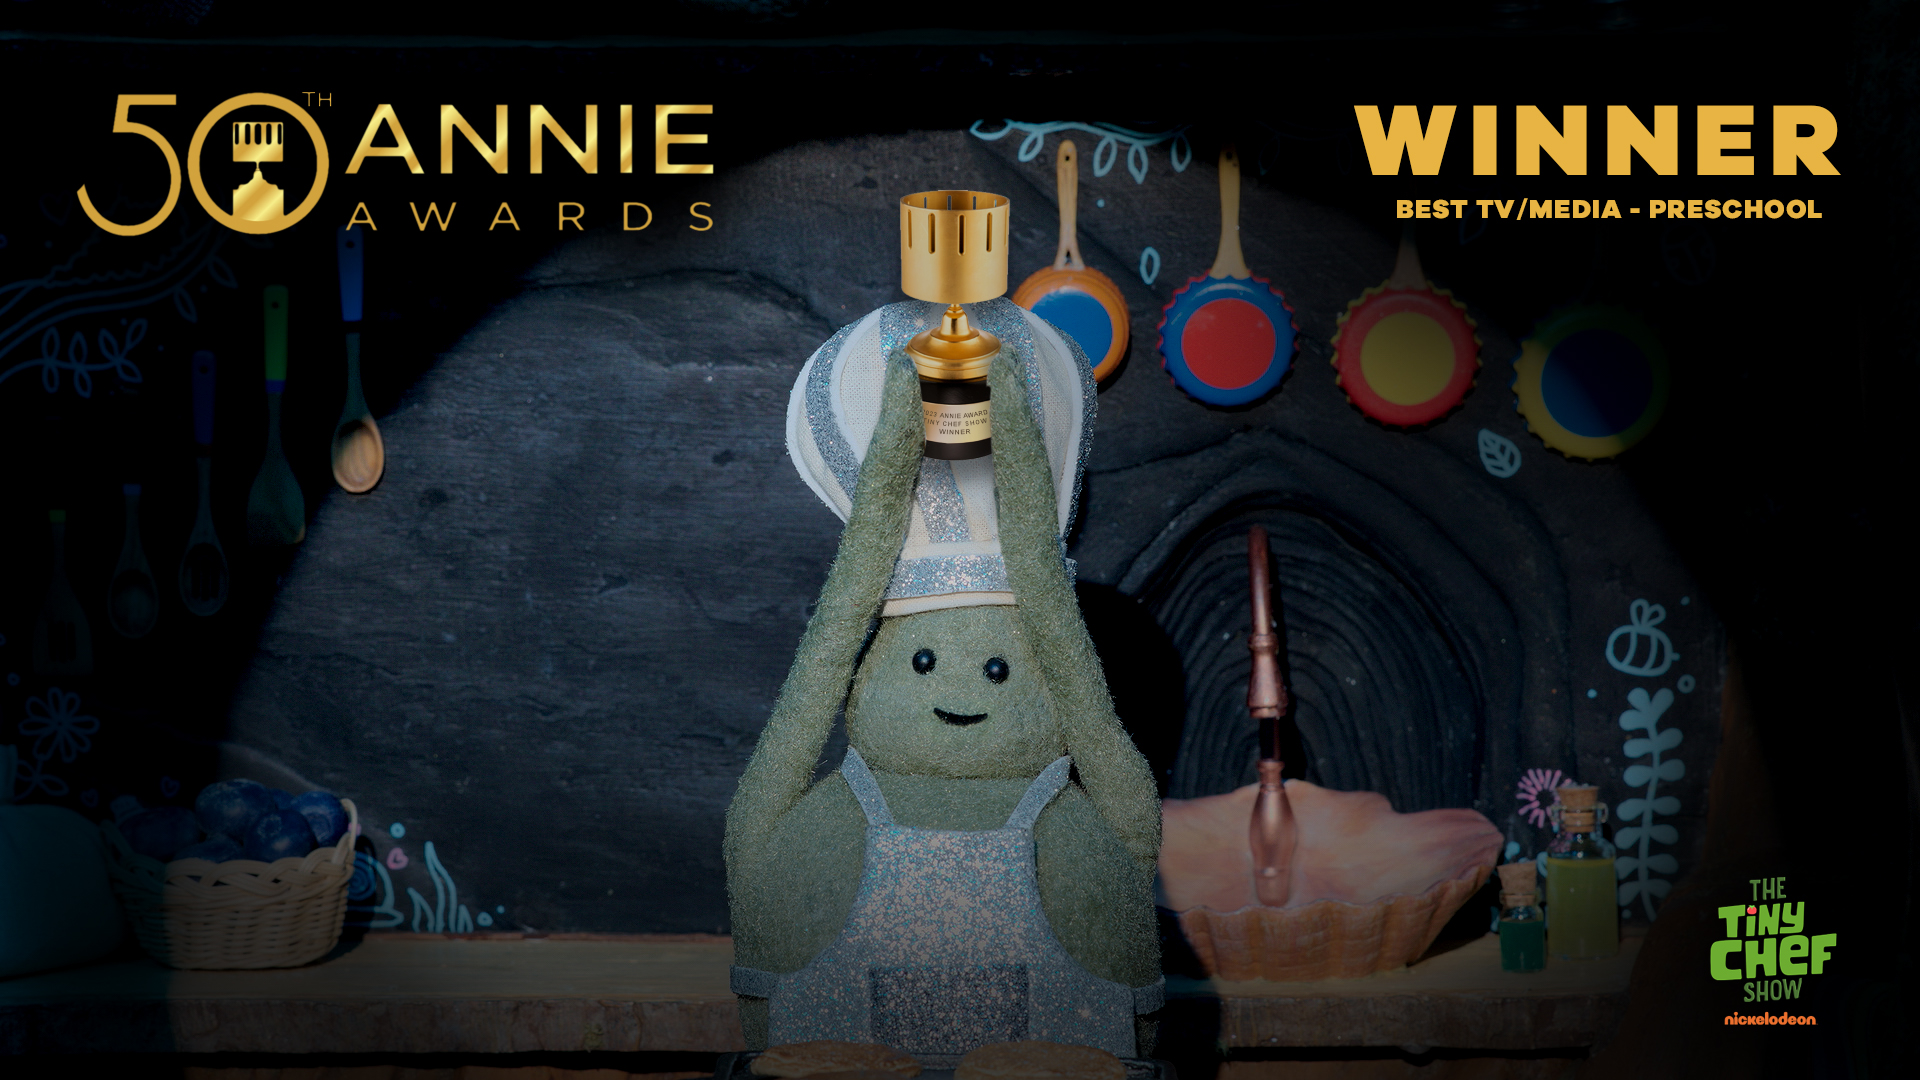 The Tiny Chef Show wins at Annie Awards